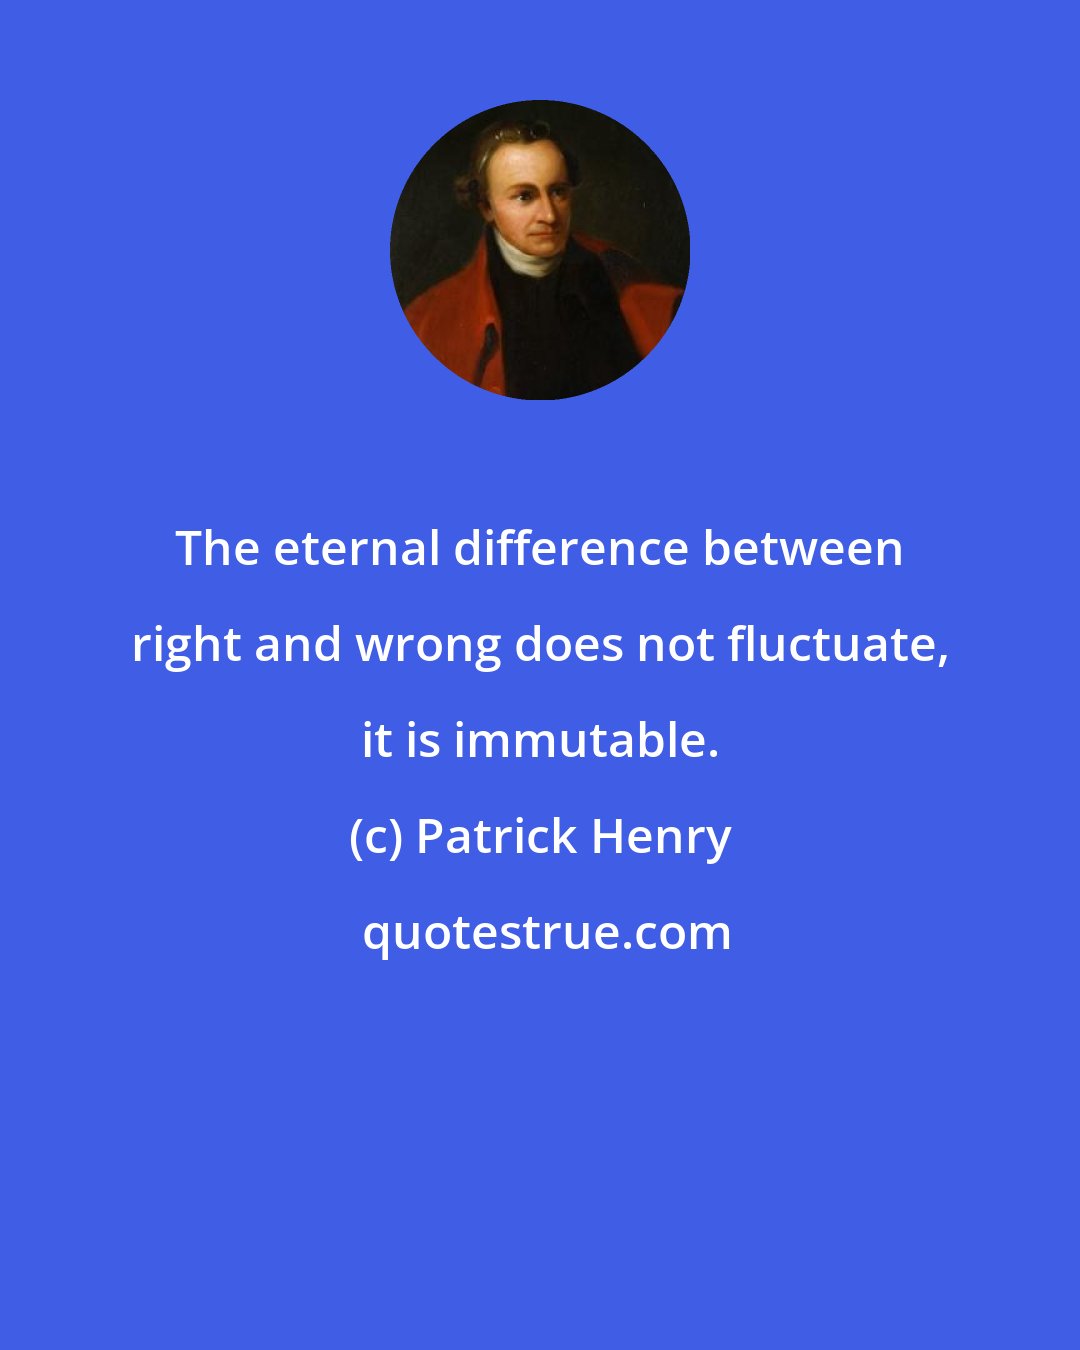 Patrick Henry: The eternal difference between right and wrong does not fluctuate, it is immutable.